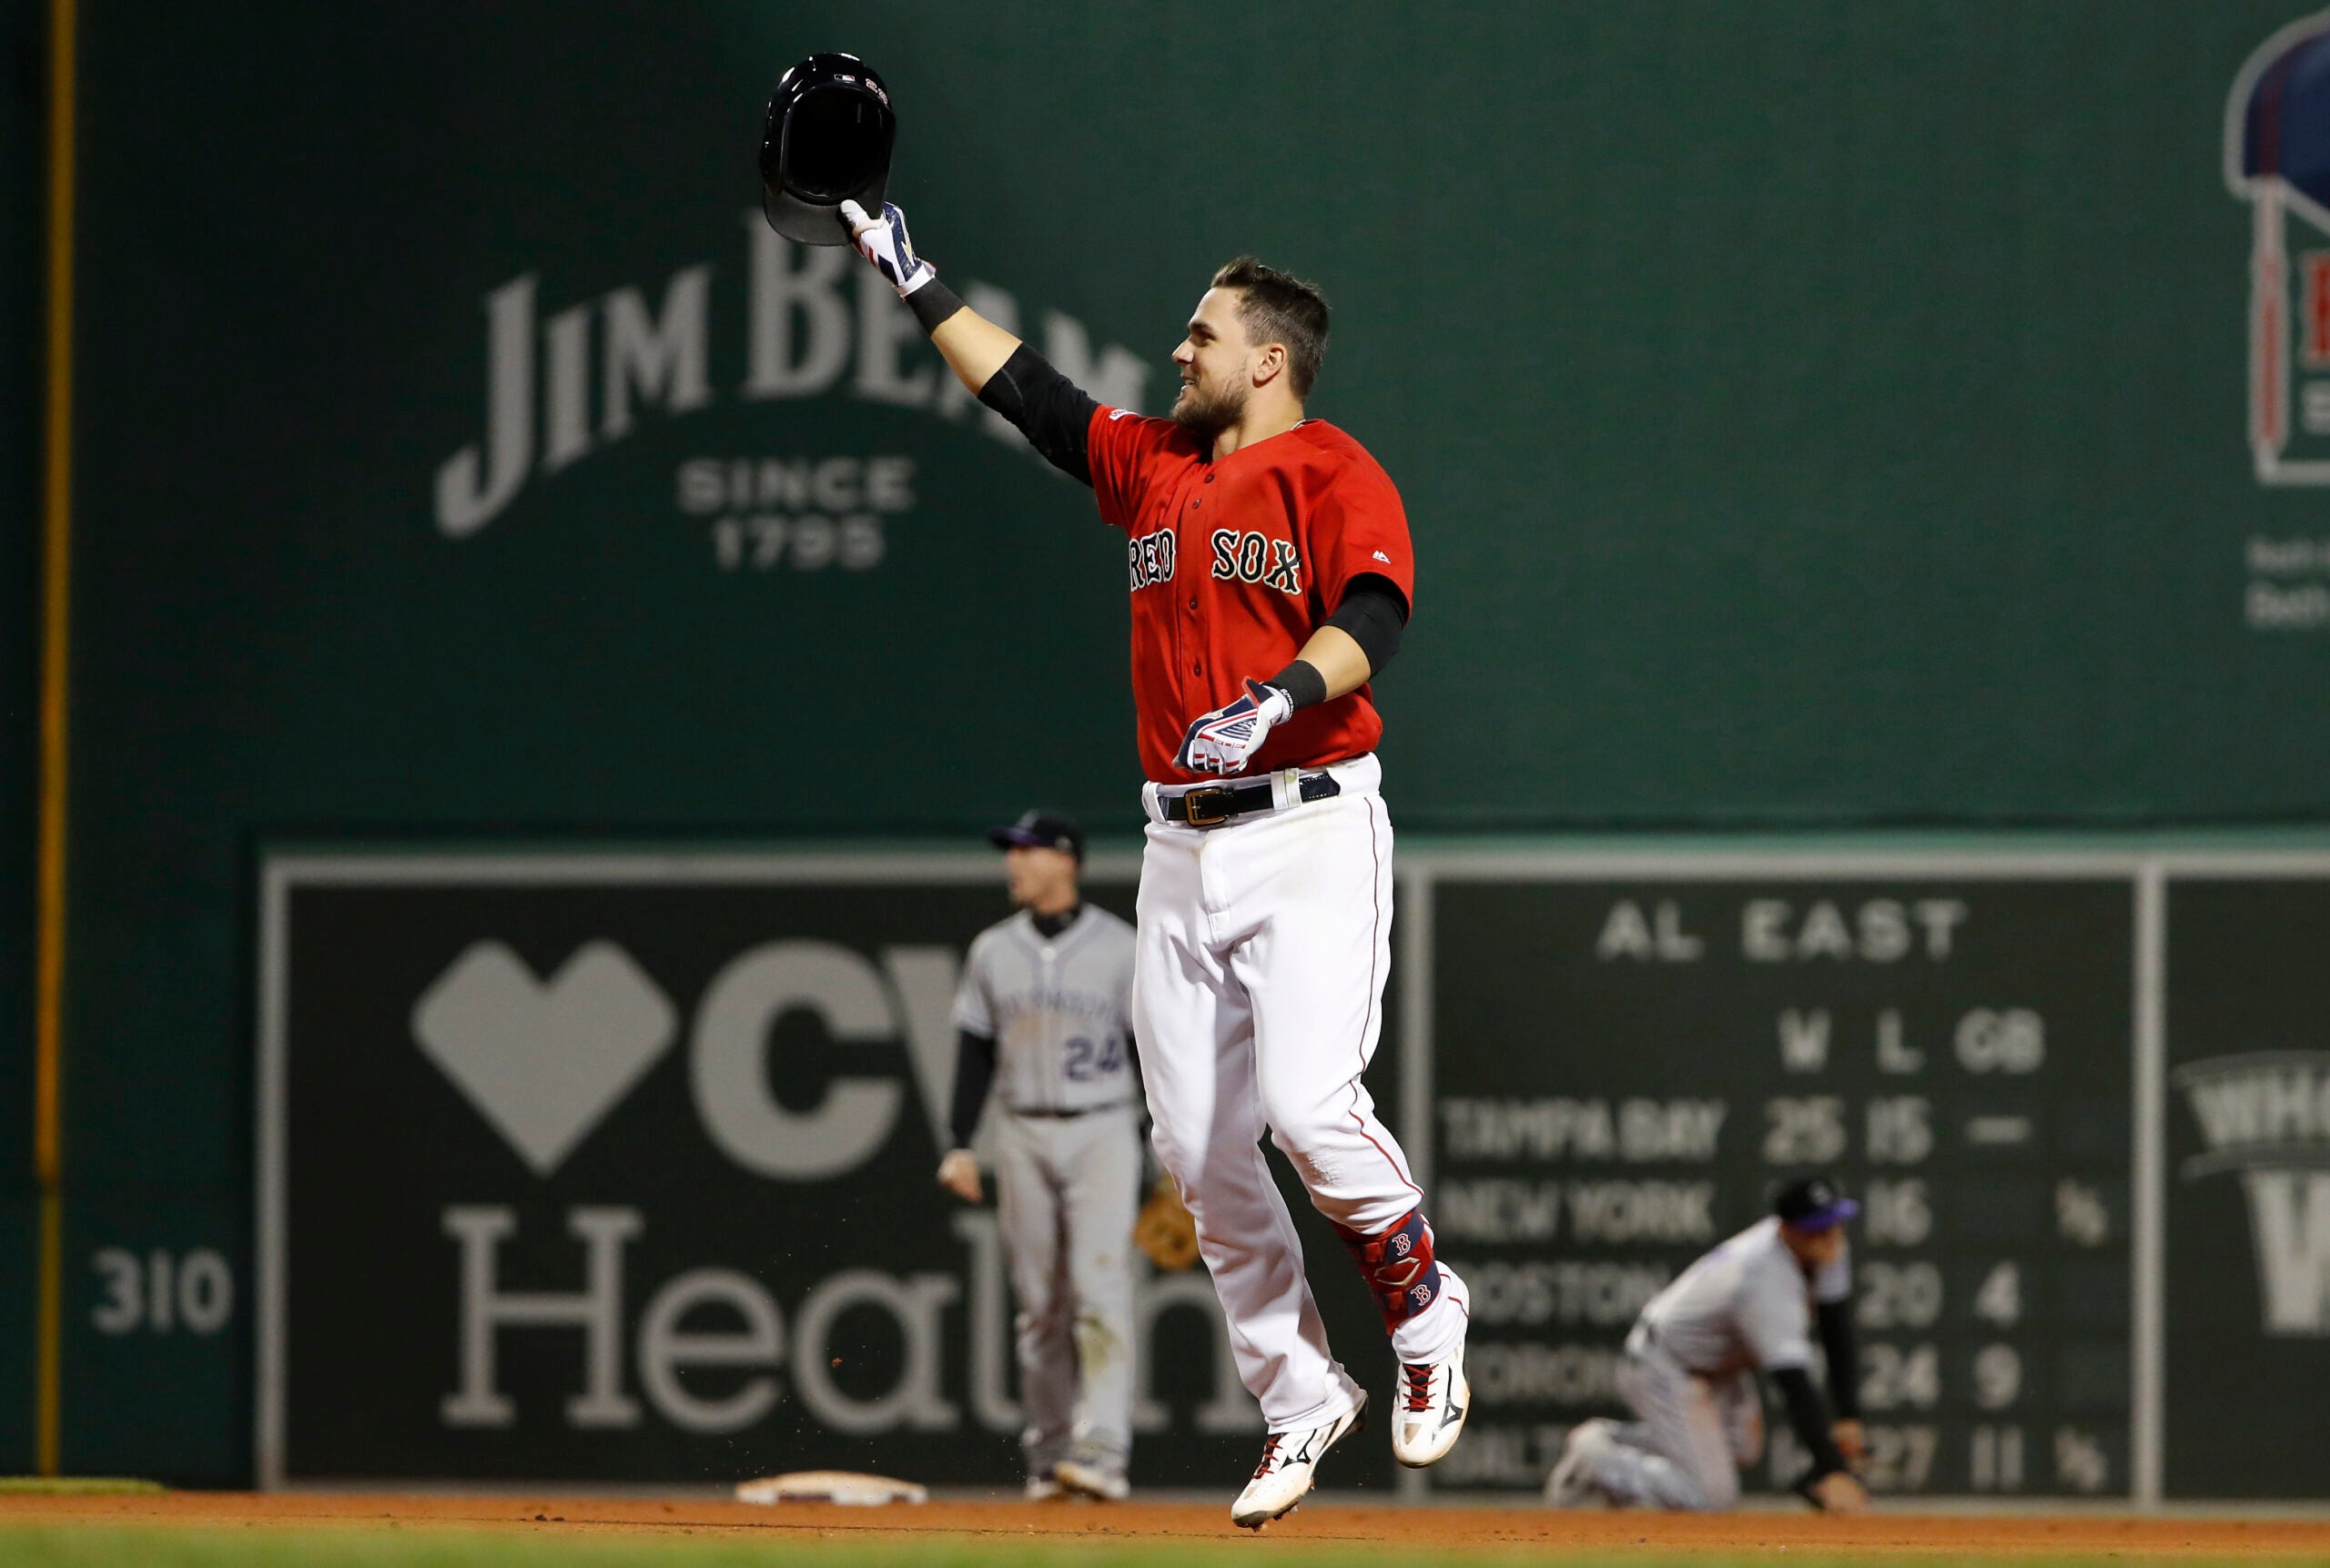 Why Red Sox rookie Michael Chavis tweets 11:11 so often